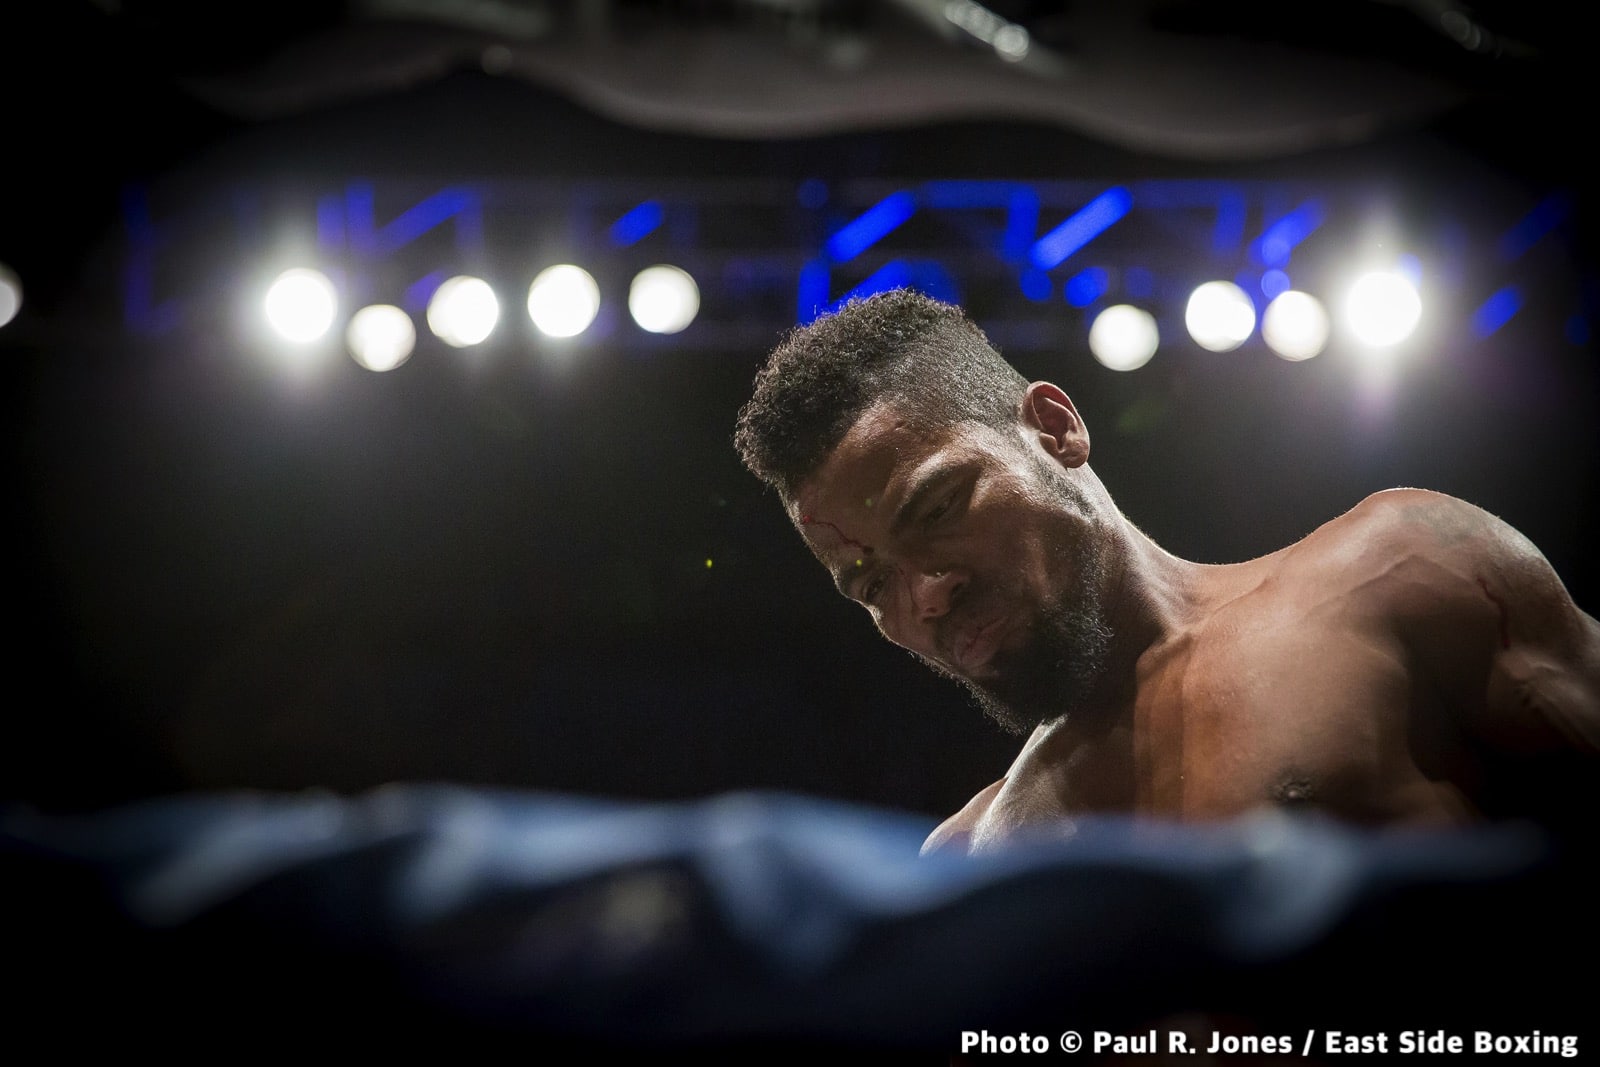 WEEKEND RECAP: Anthony Peterson Wins, Outlaw Suffers Setback. Here’s What It Means in 3 Takeaways — Prograis, Taylor, Catterall, More!